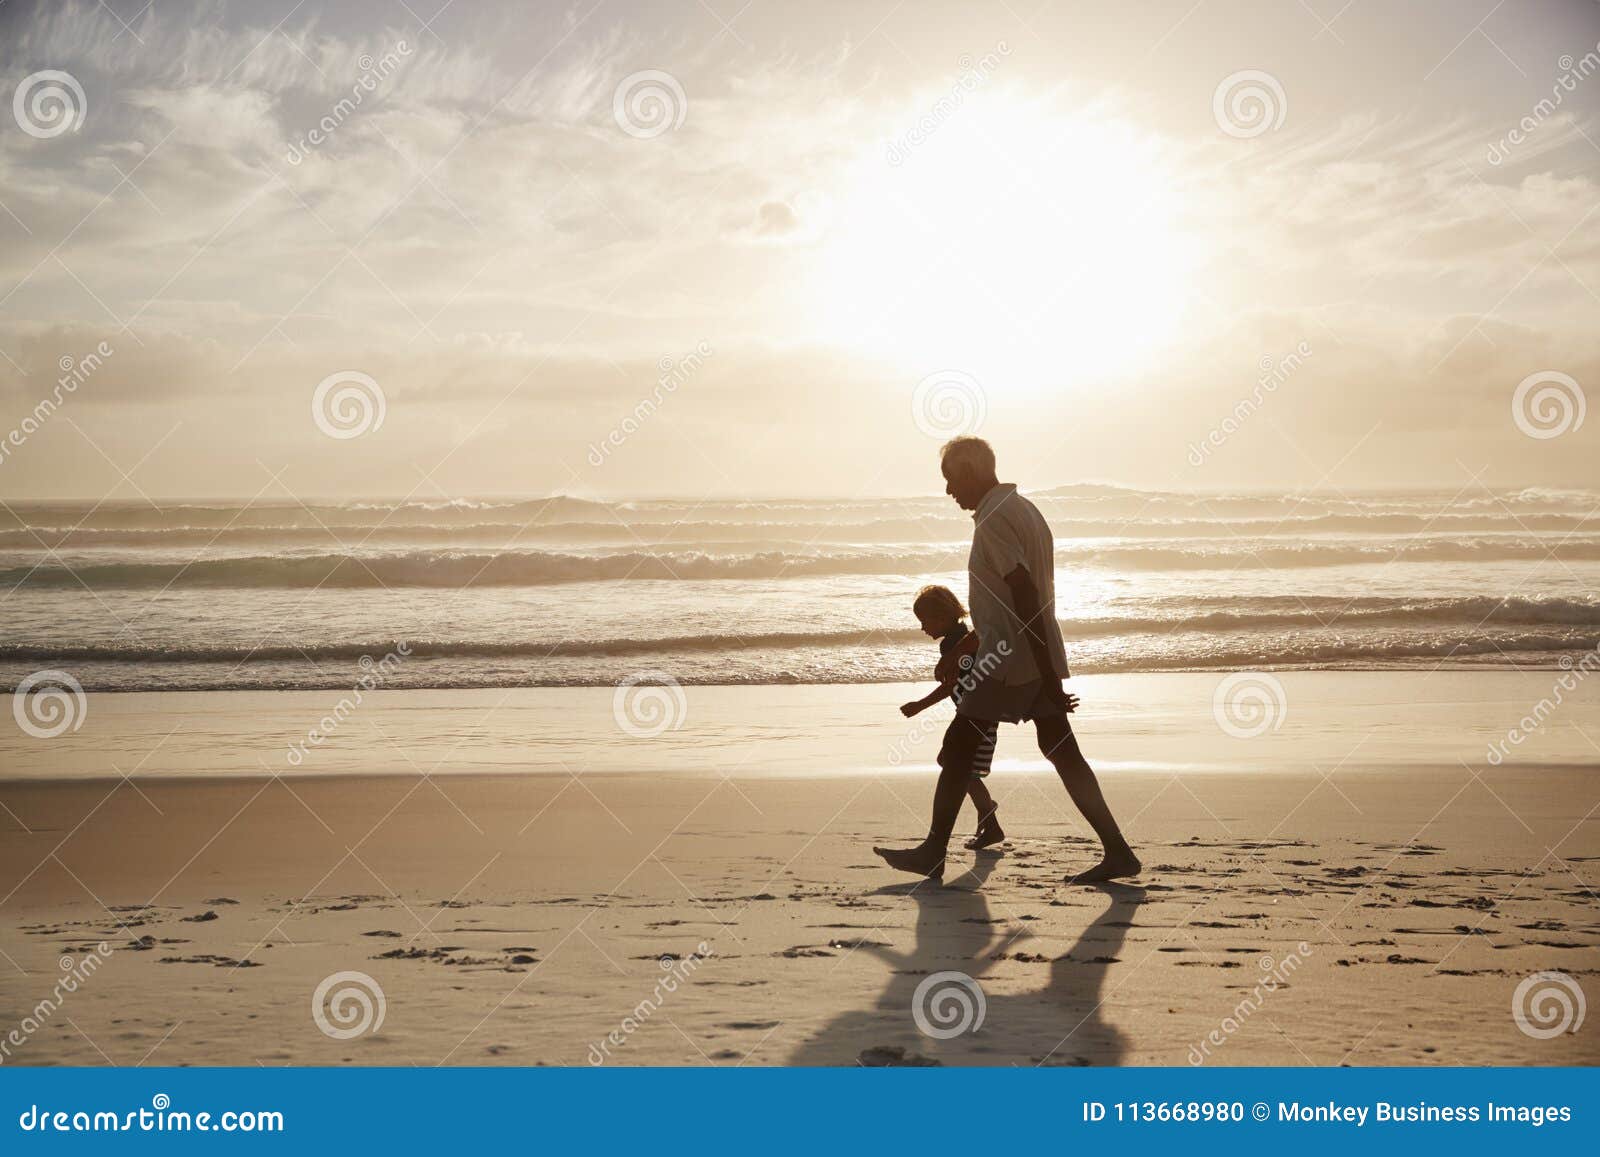 silhouette of grandfather walking along beach with grandson